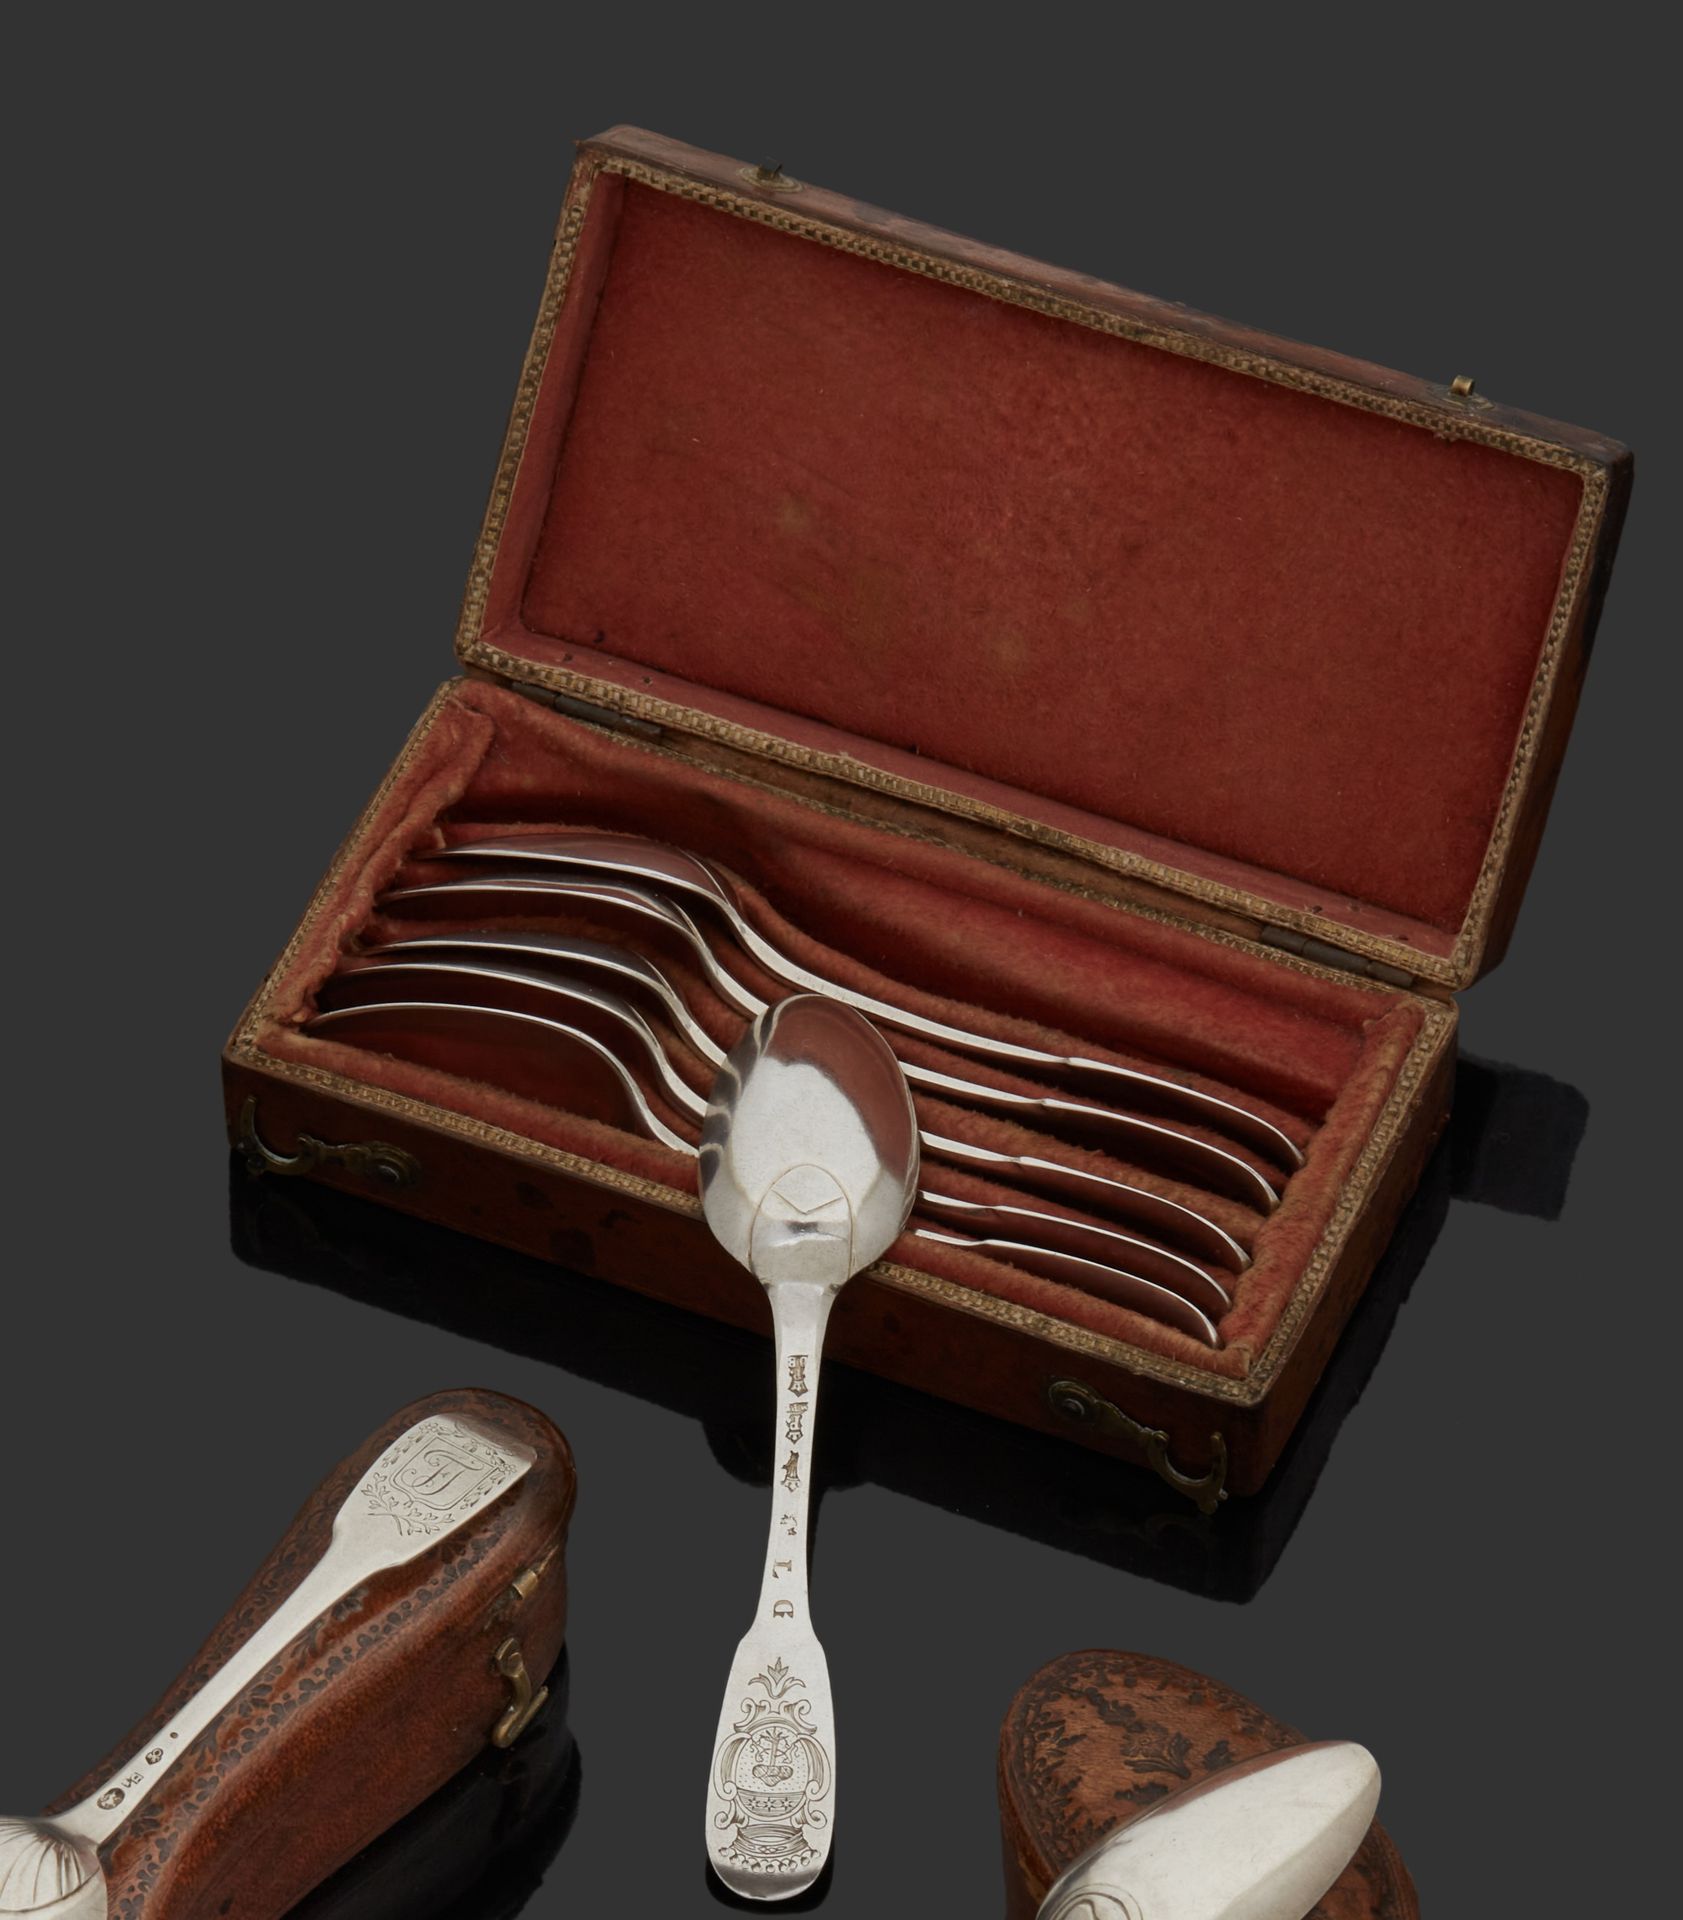 Null MONTPELLIER 1766
Set of six small silver spoons uniplat model, engraved wit&hellip;